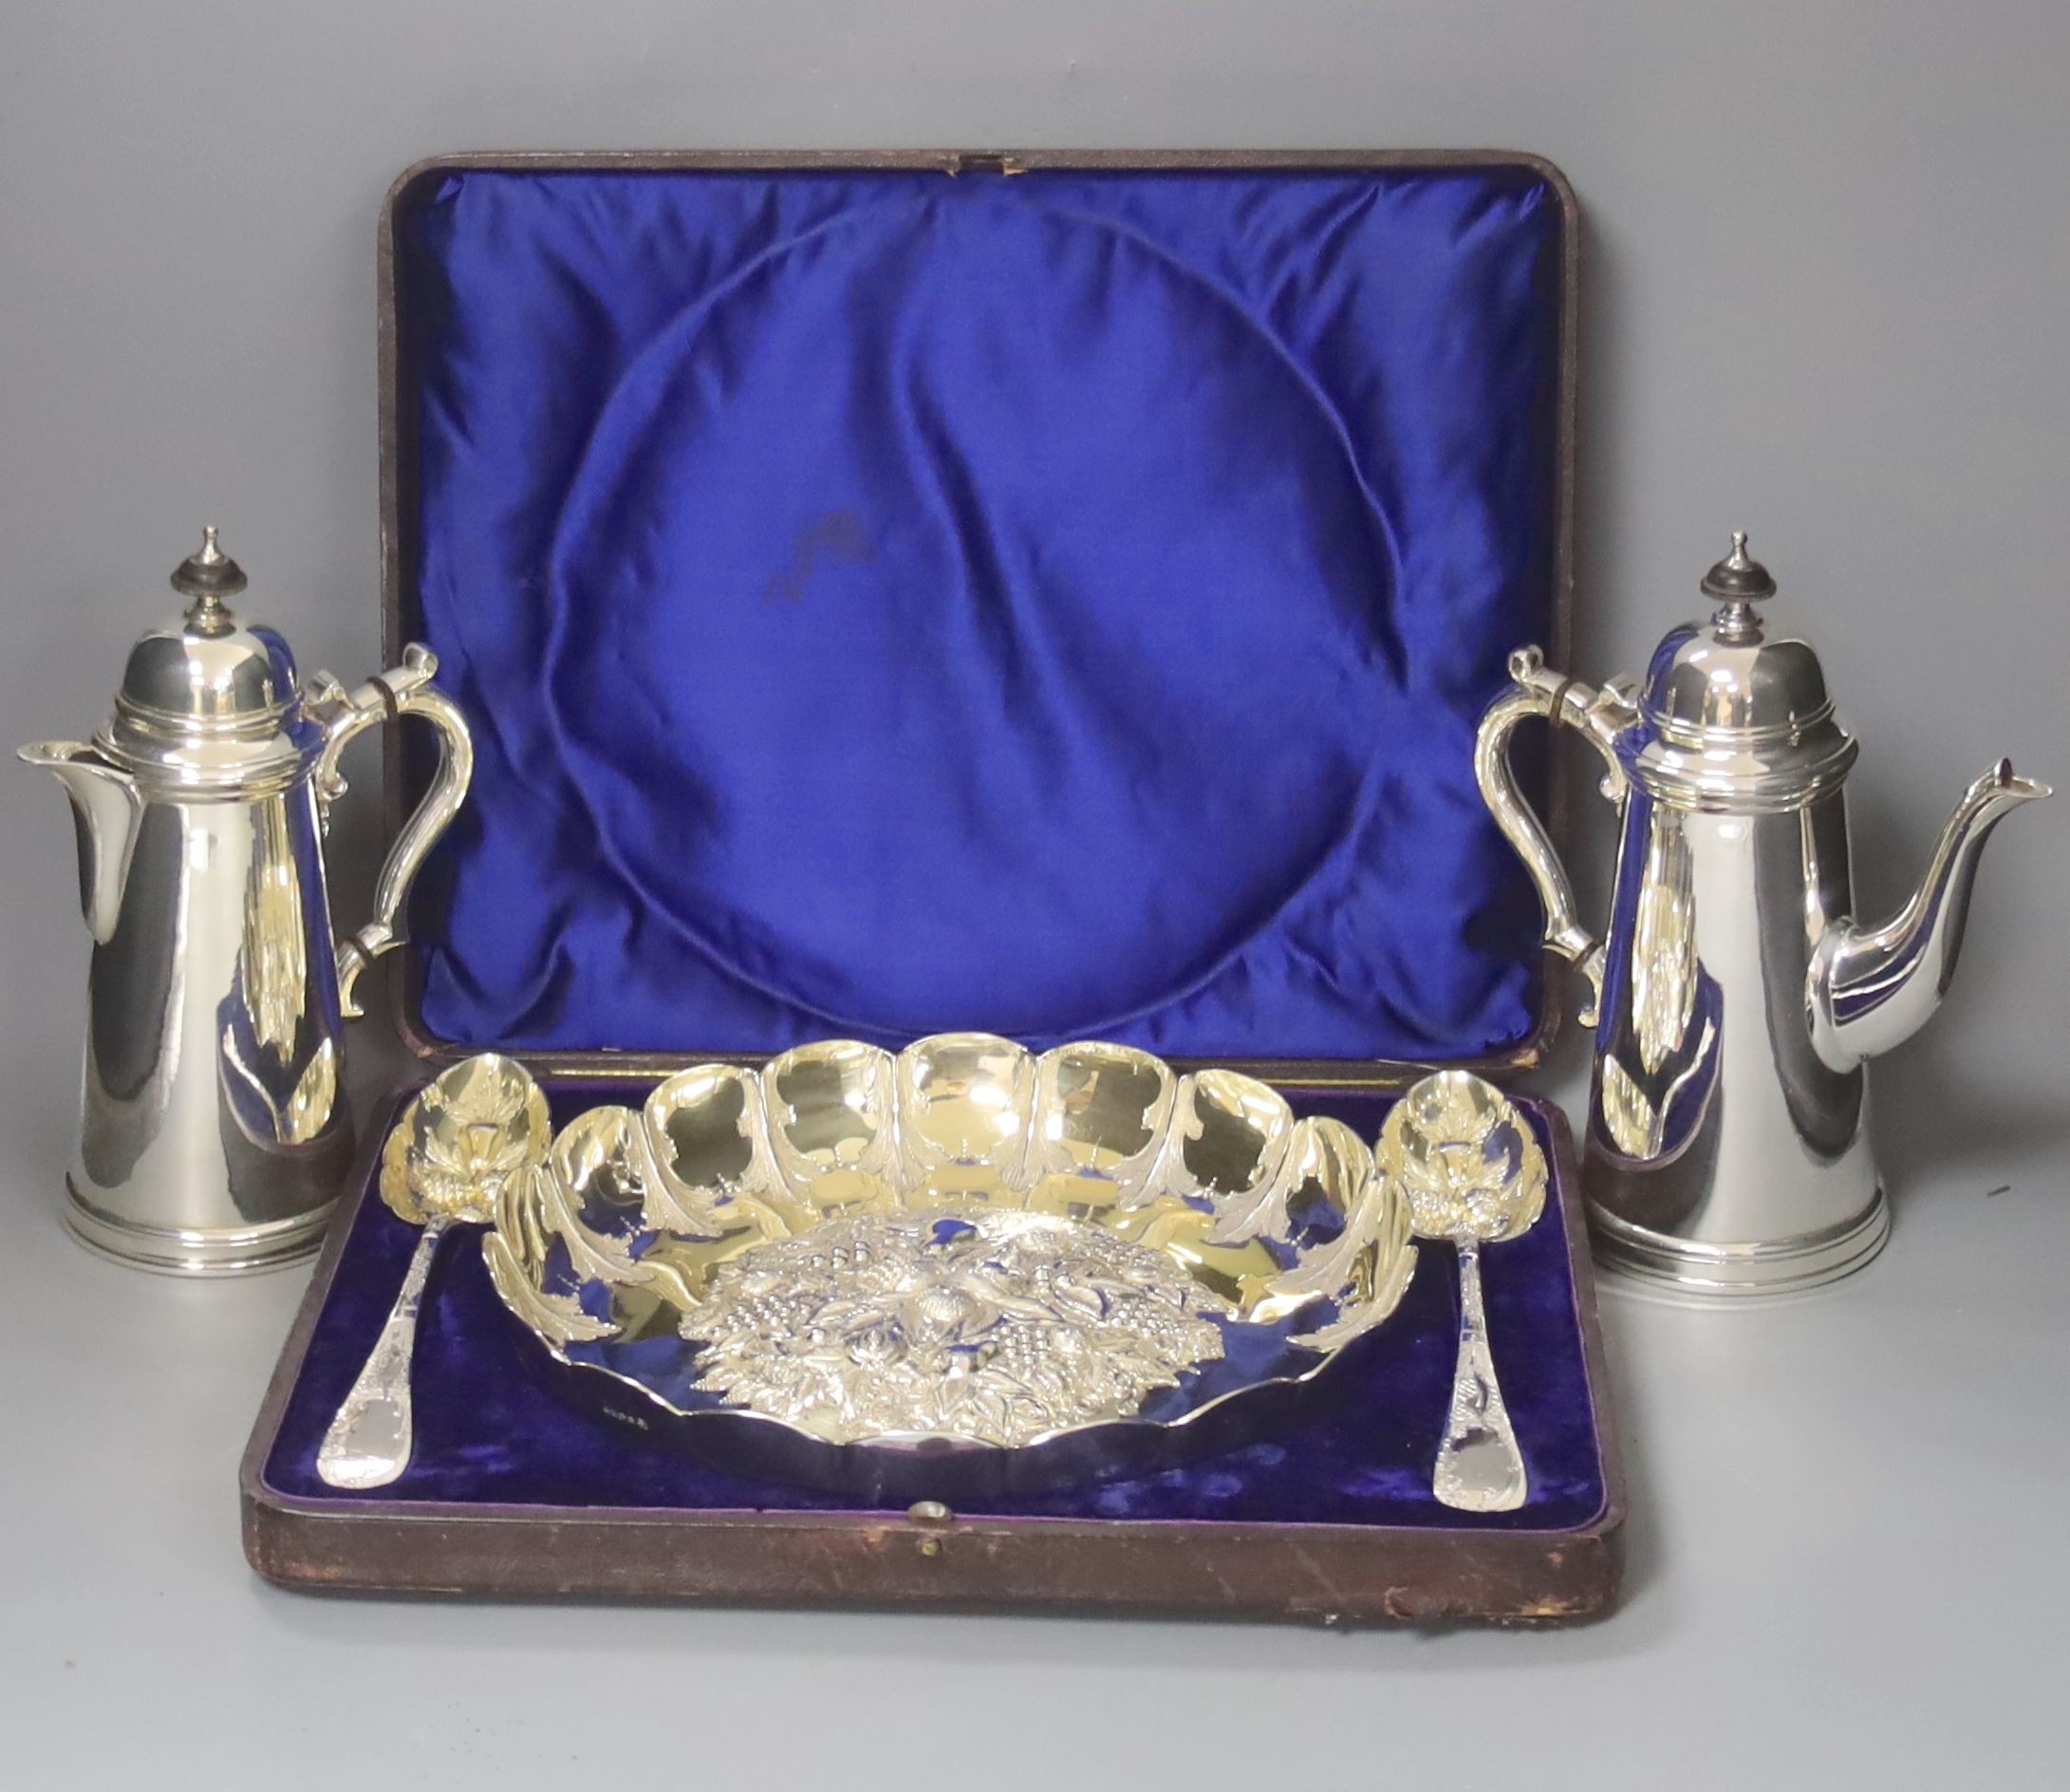 A quantity of plated items including cased dessert bowl and servers, cafe au lait pair and cased items, coasters, wine coaster and pair of condiments